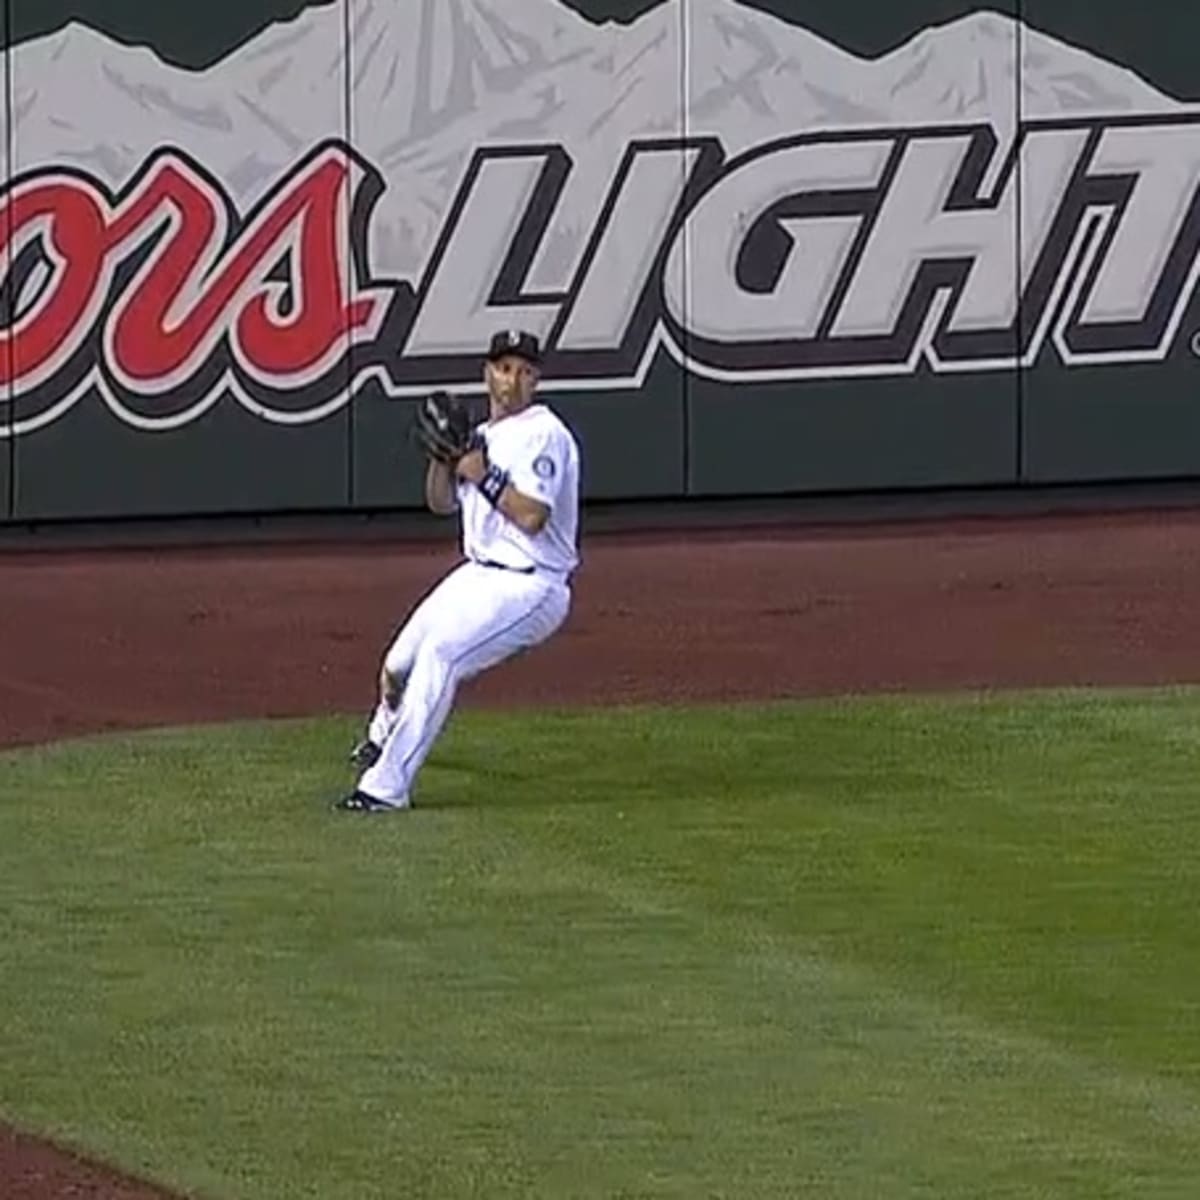 Mariners' Raul Ibanez Makes Worst Outfield Throw in Baseball History (GIF)  